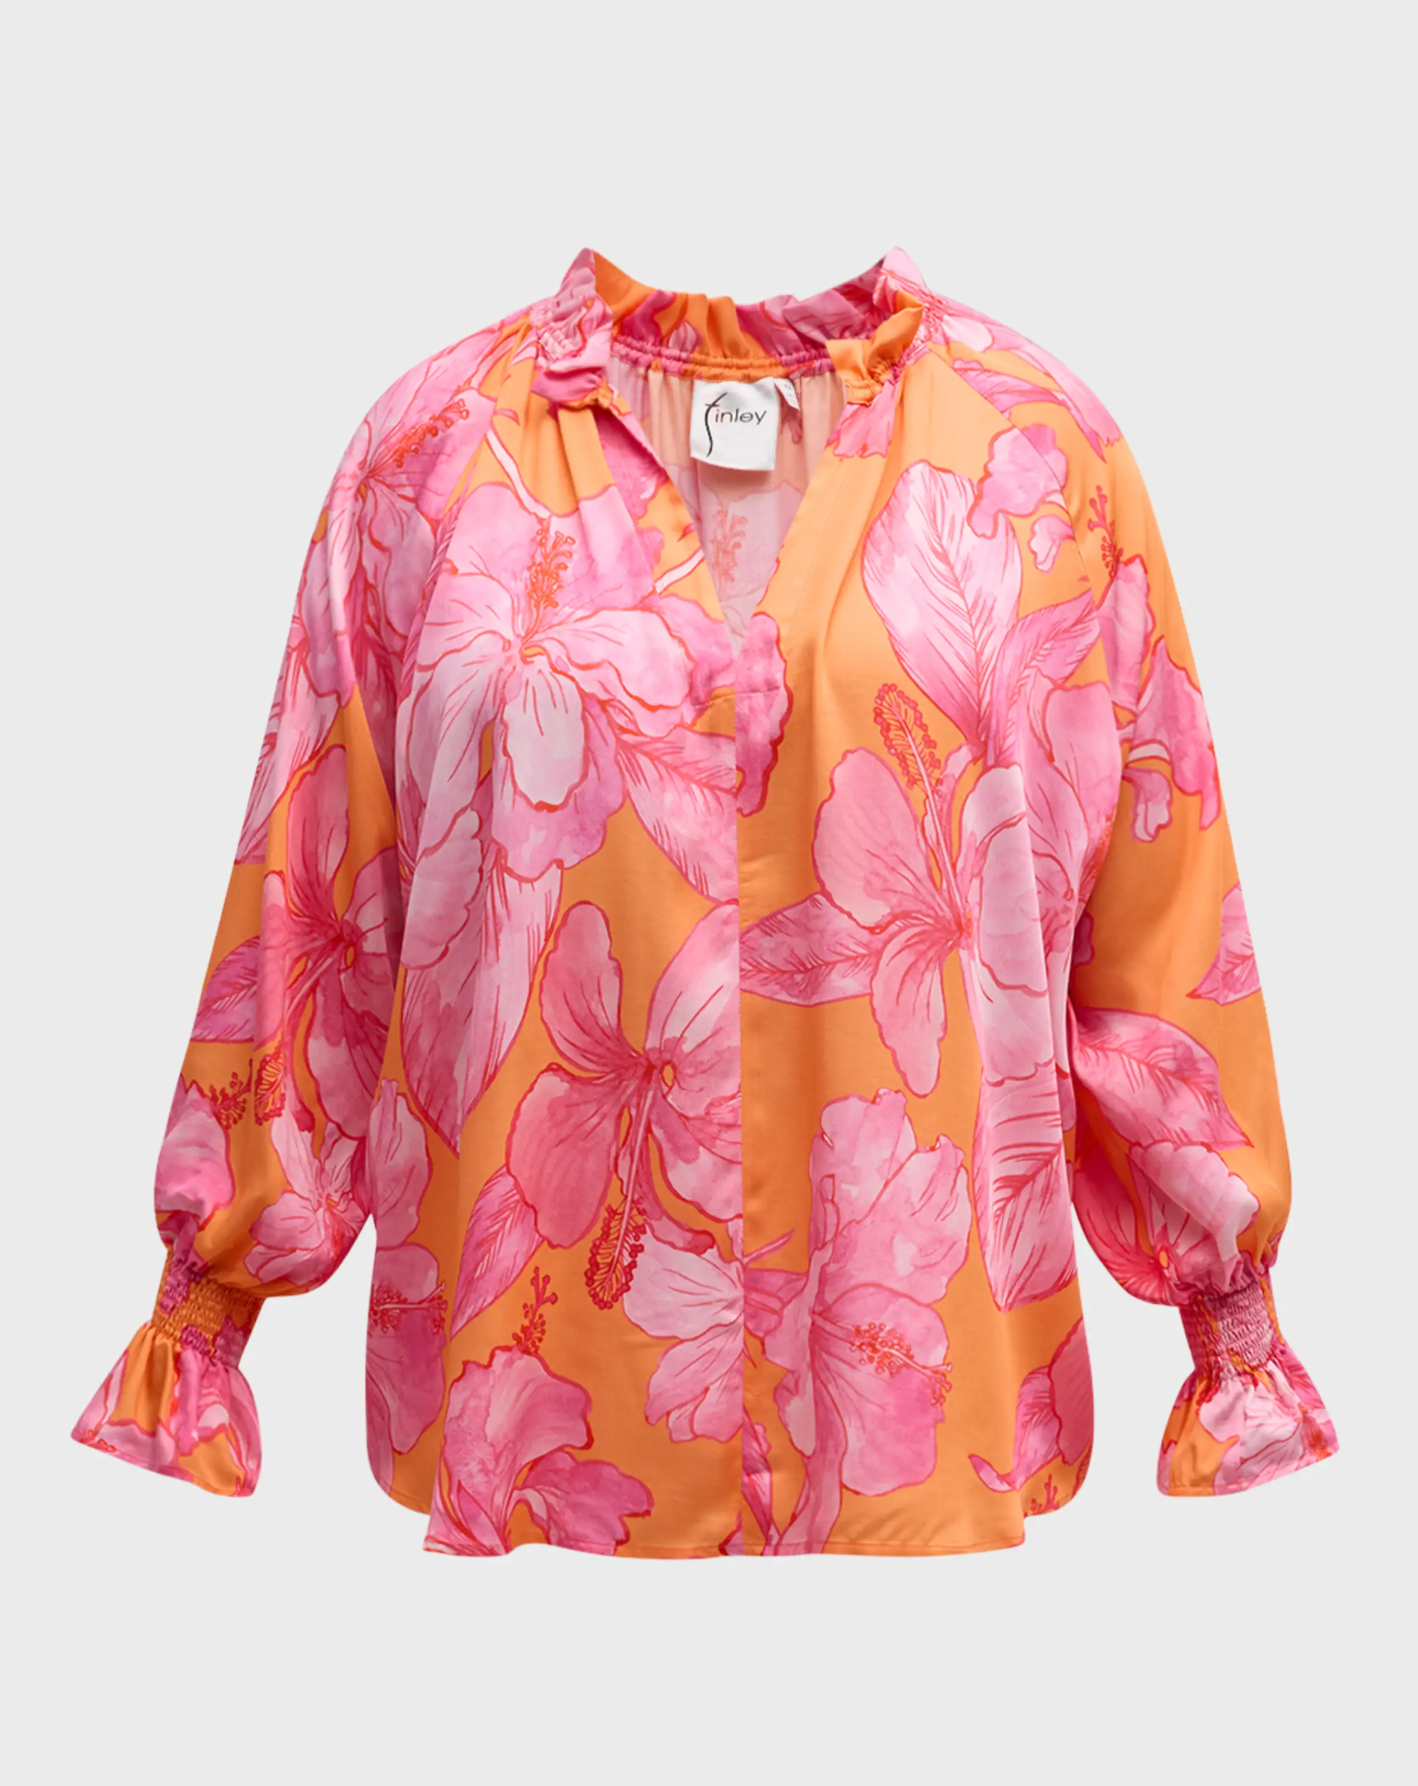 Candance Top in Royal Hawaiian - The French Shoppe